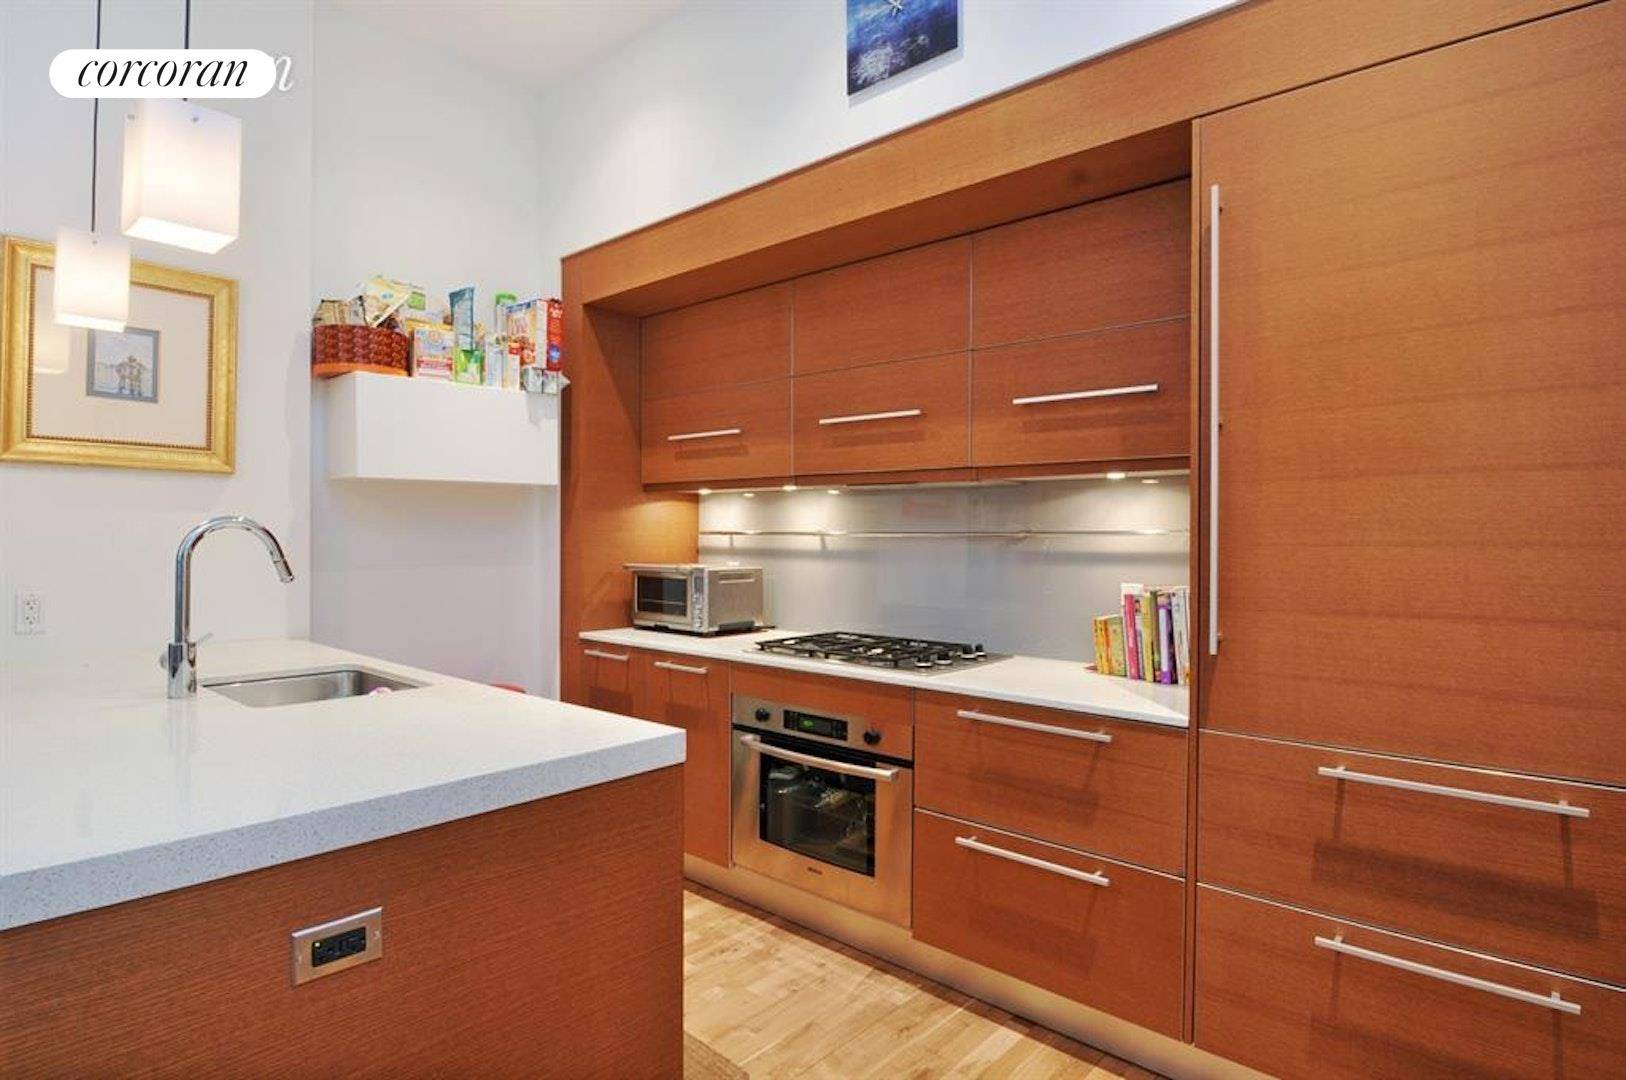 Welcome to One Brooklyn, the most wonderful full service condo in Brooklyn Heights.